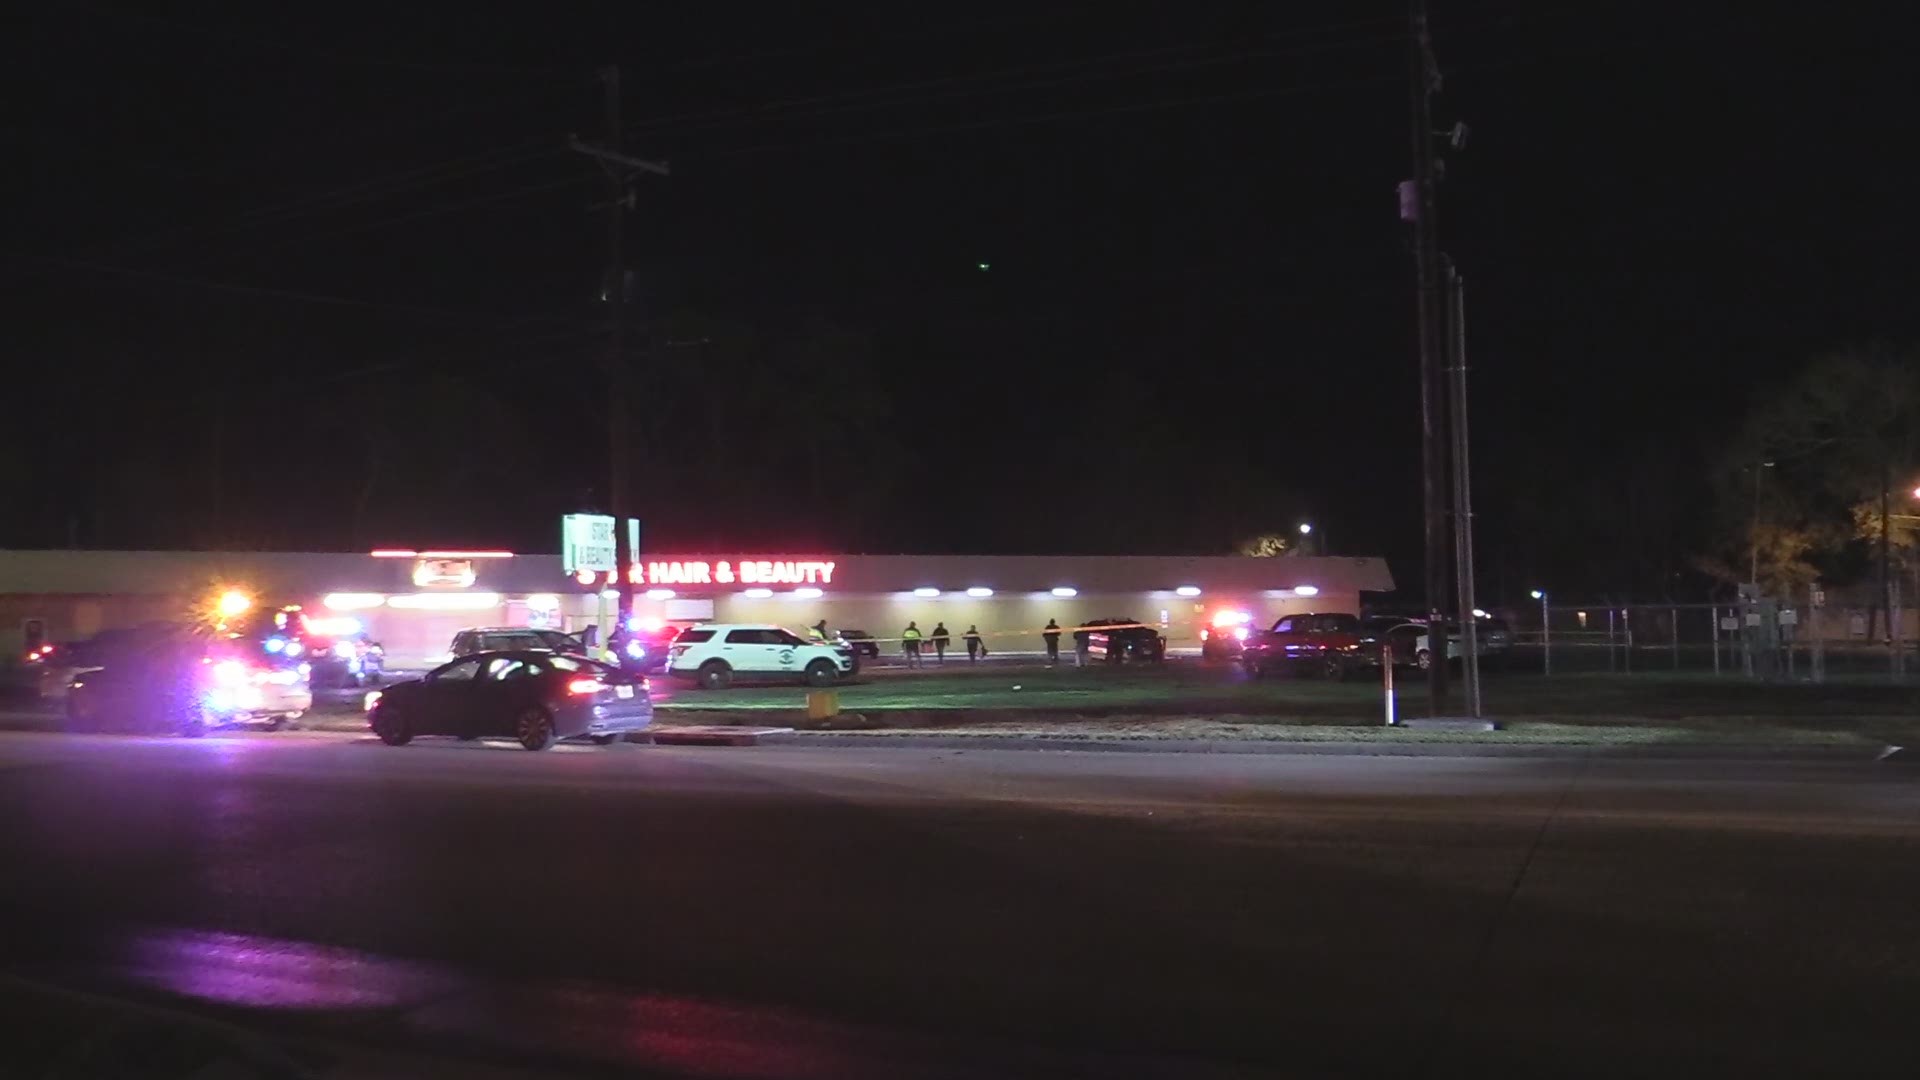 Beaumont Police are searching for a suspect after a 25-year-old man from Orange was killed following an early Christmas Day shooting outside a bar in Beaumont.